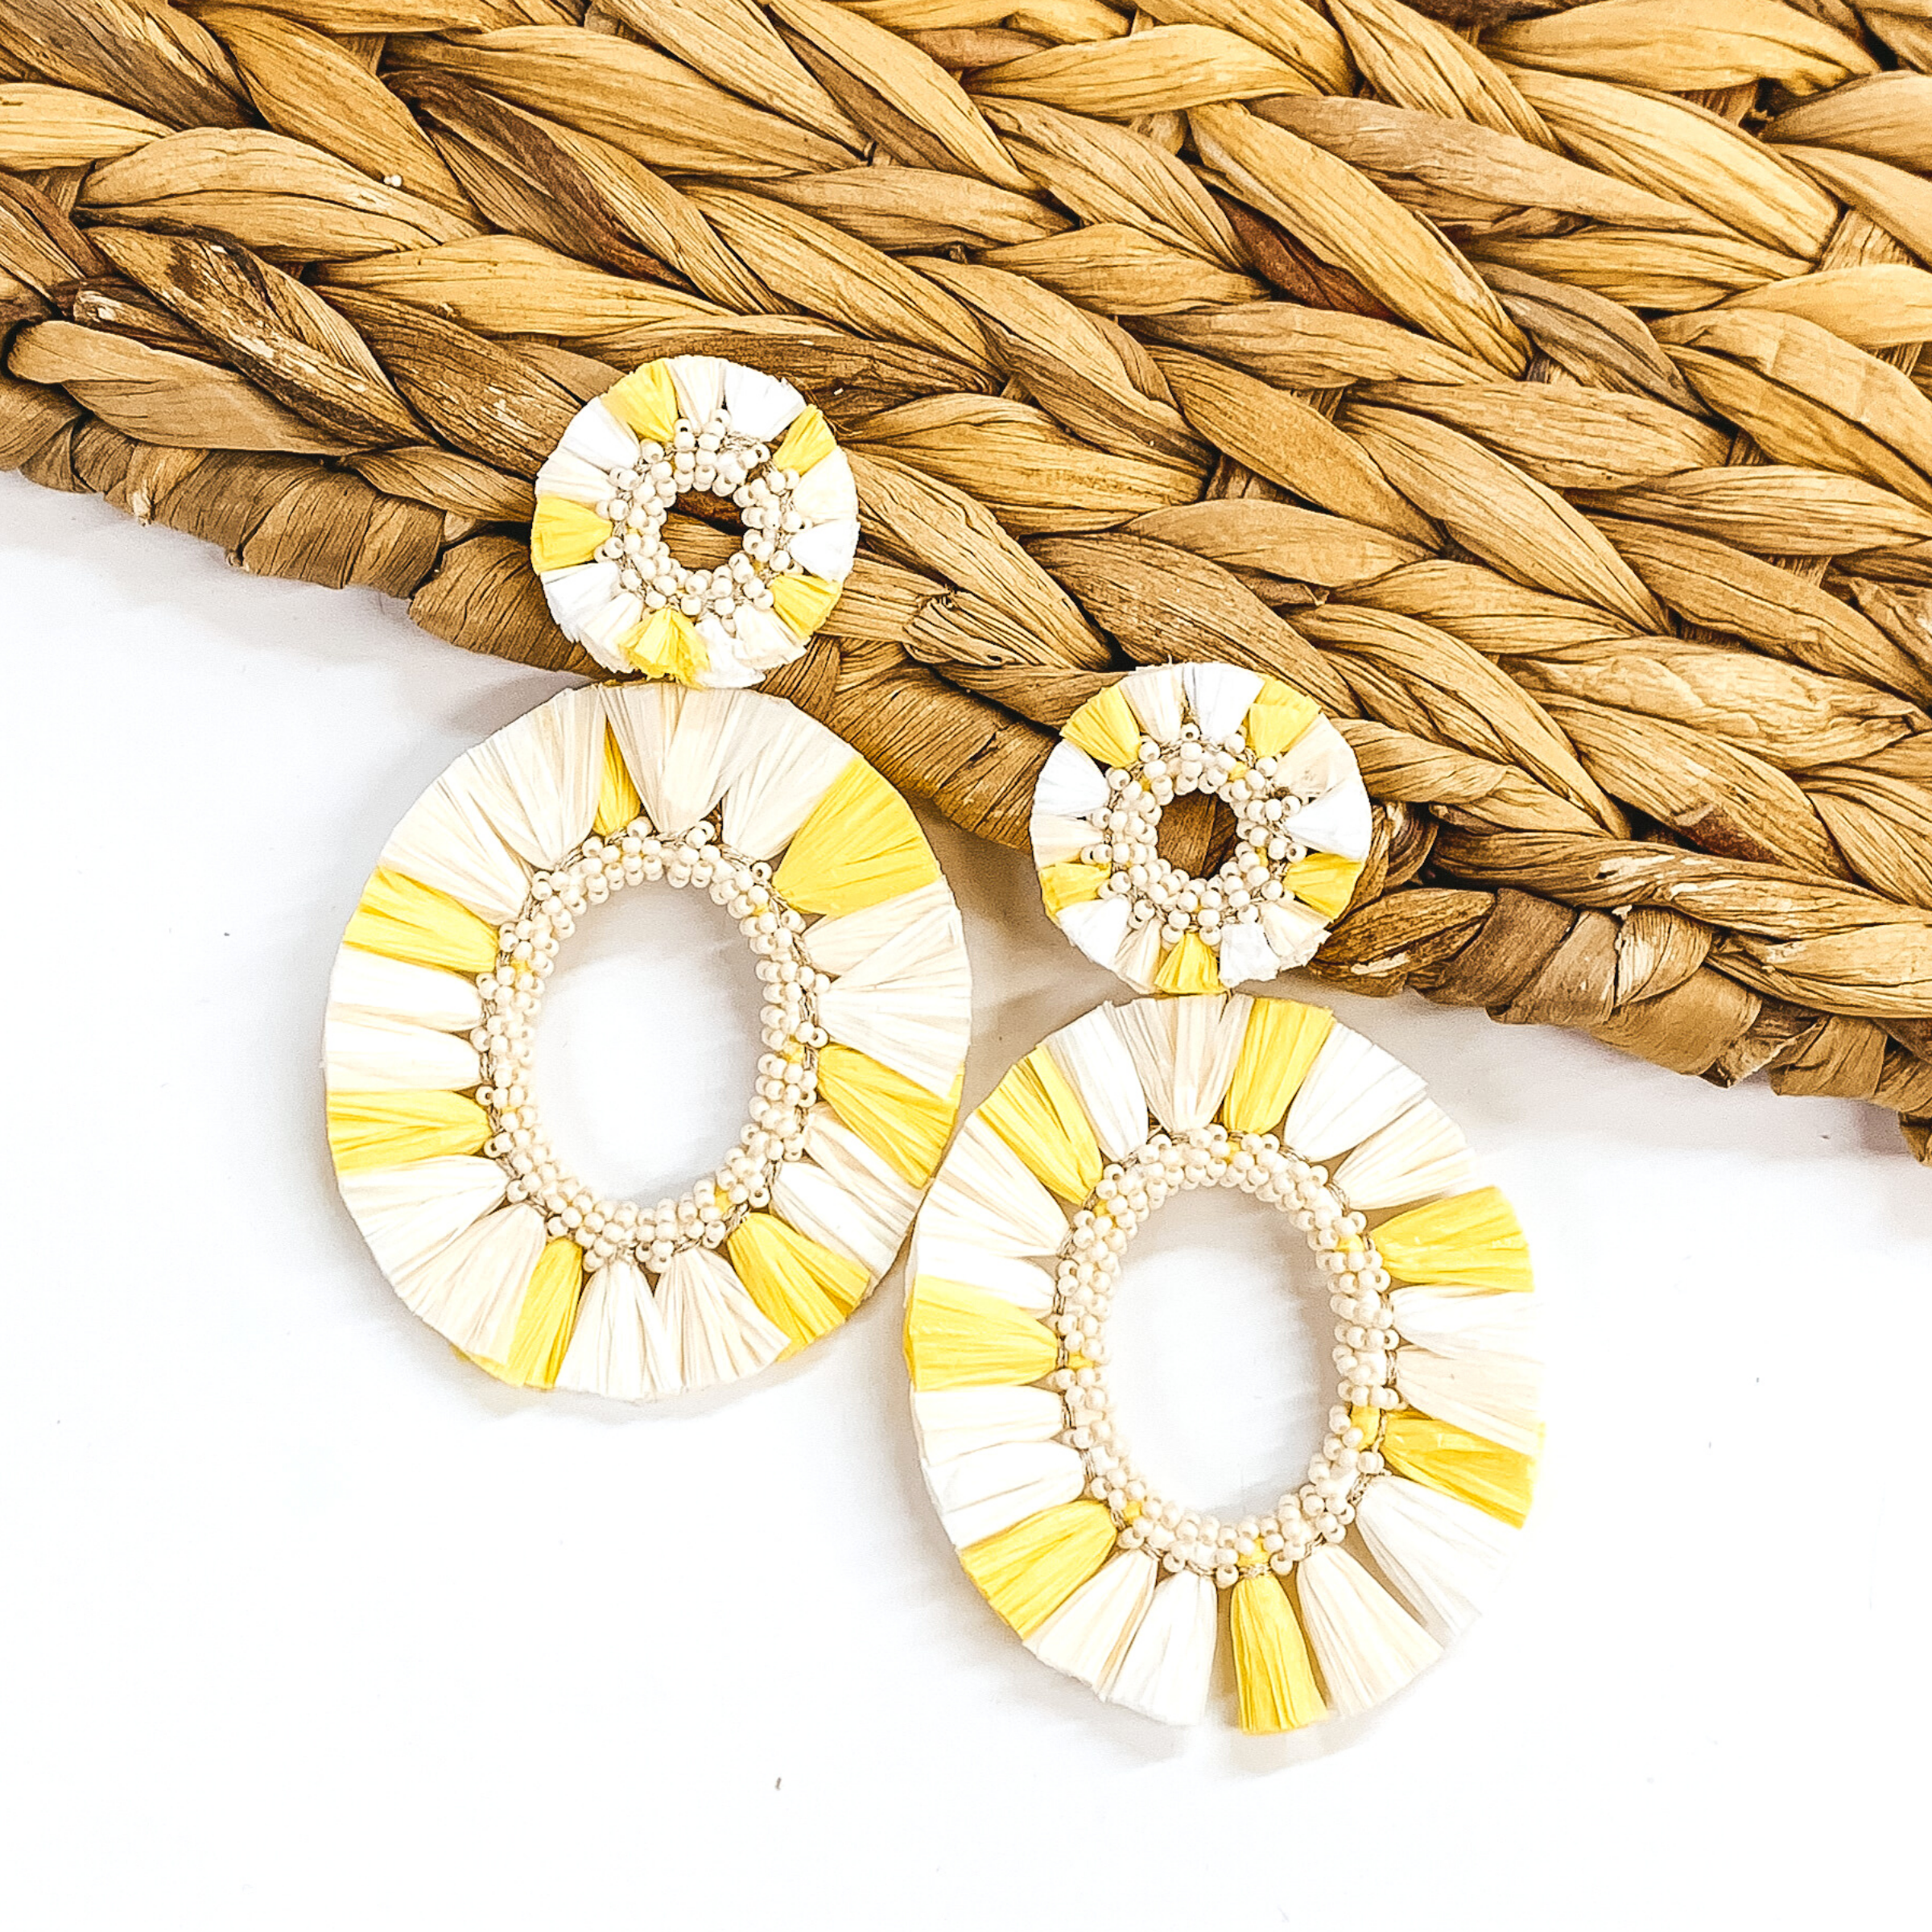 Circle, open beaded earrings with raffia outline. These earrings include an open, circle beaded pendant with raffia outline. The earrings are ivory and yellow colored. These earrings are pictured on a white backround while partially laying on a tan woven material. 